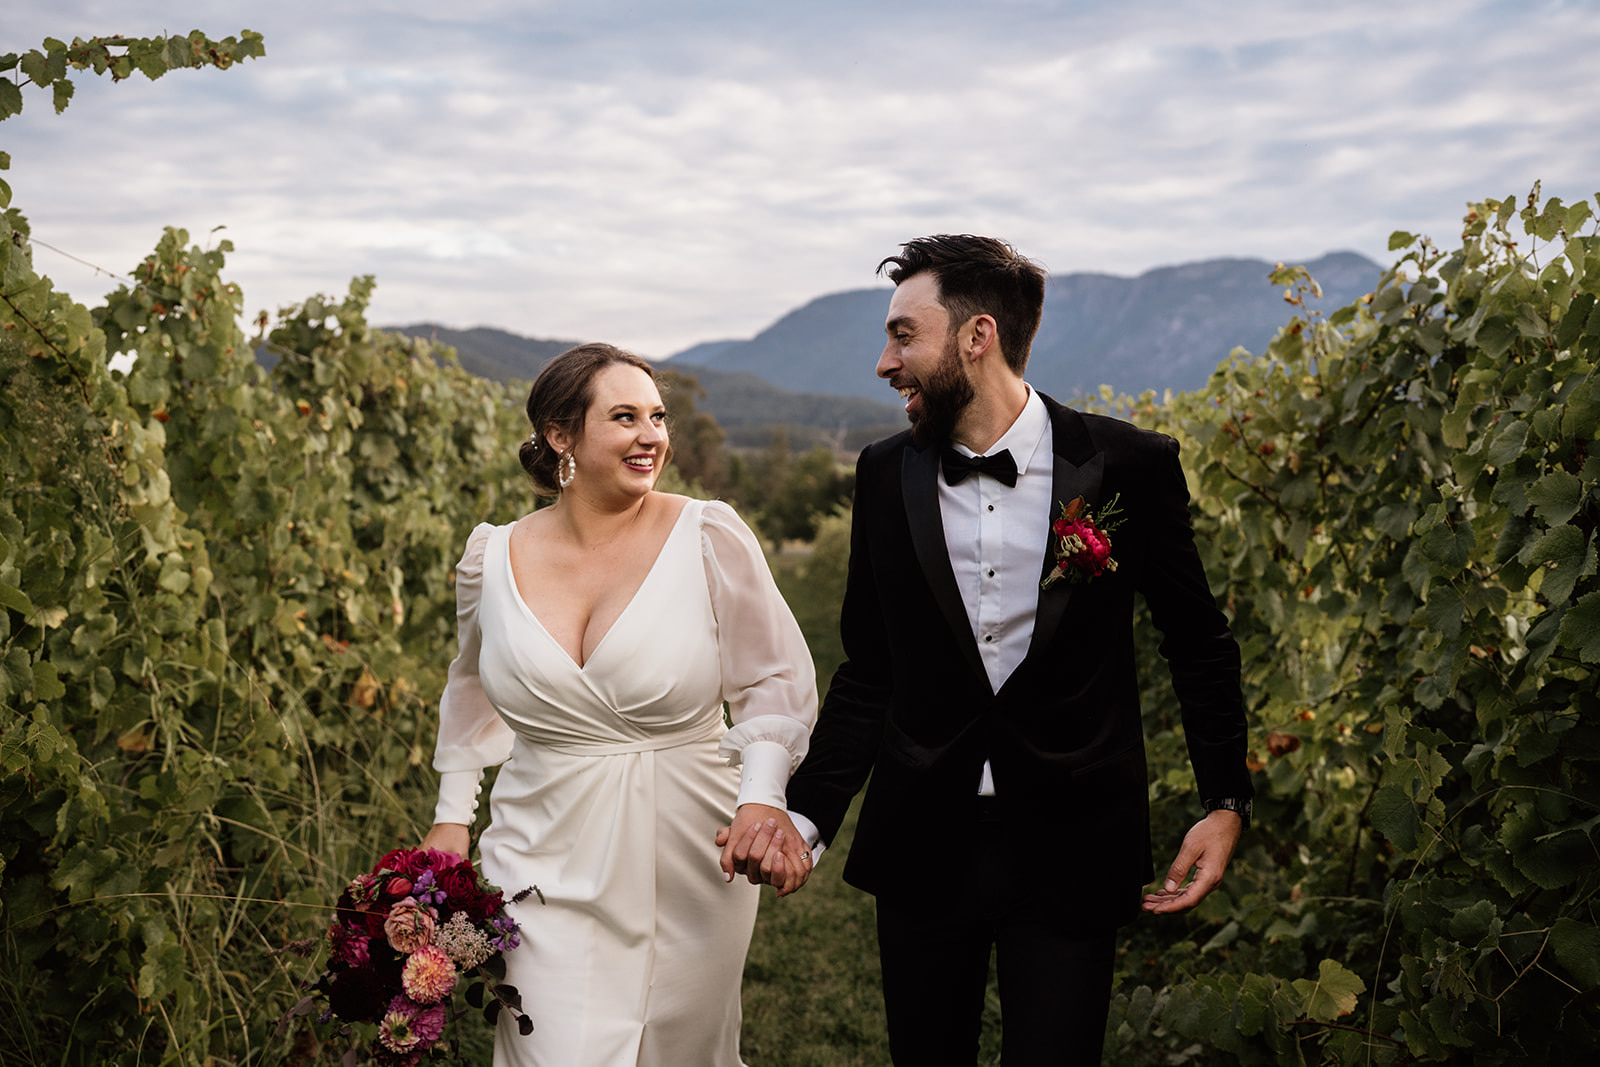 Natural wedding photo at Feathertop Winery in Porepunkah. Bride and groom candid photo in the vineyards at Feathertop.